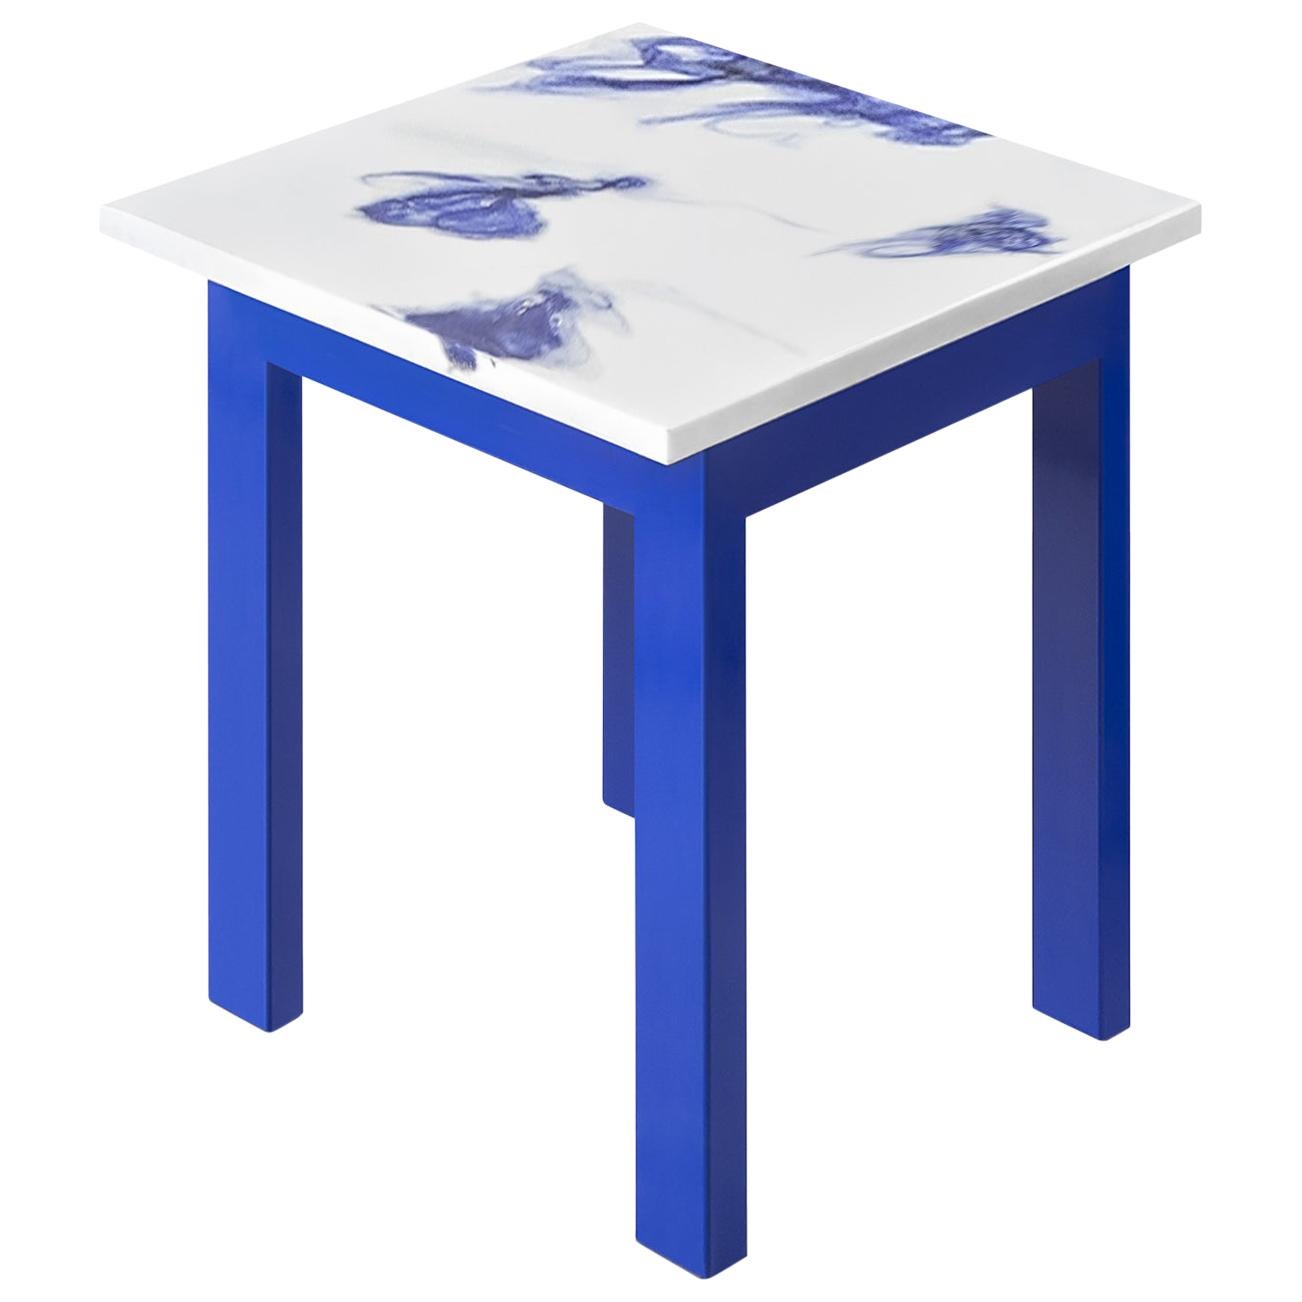 Contemporary Marco Guazzini Stool Carrara Marble Wool Effect Blue White For Sale